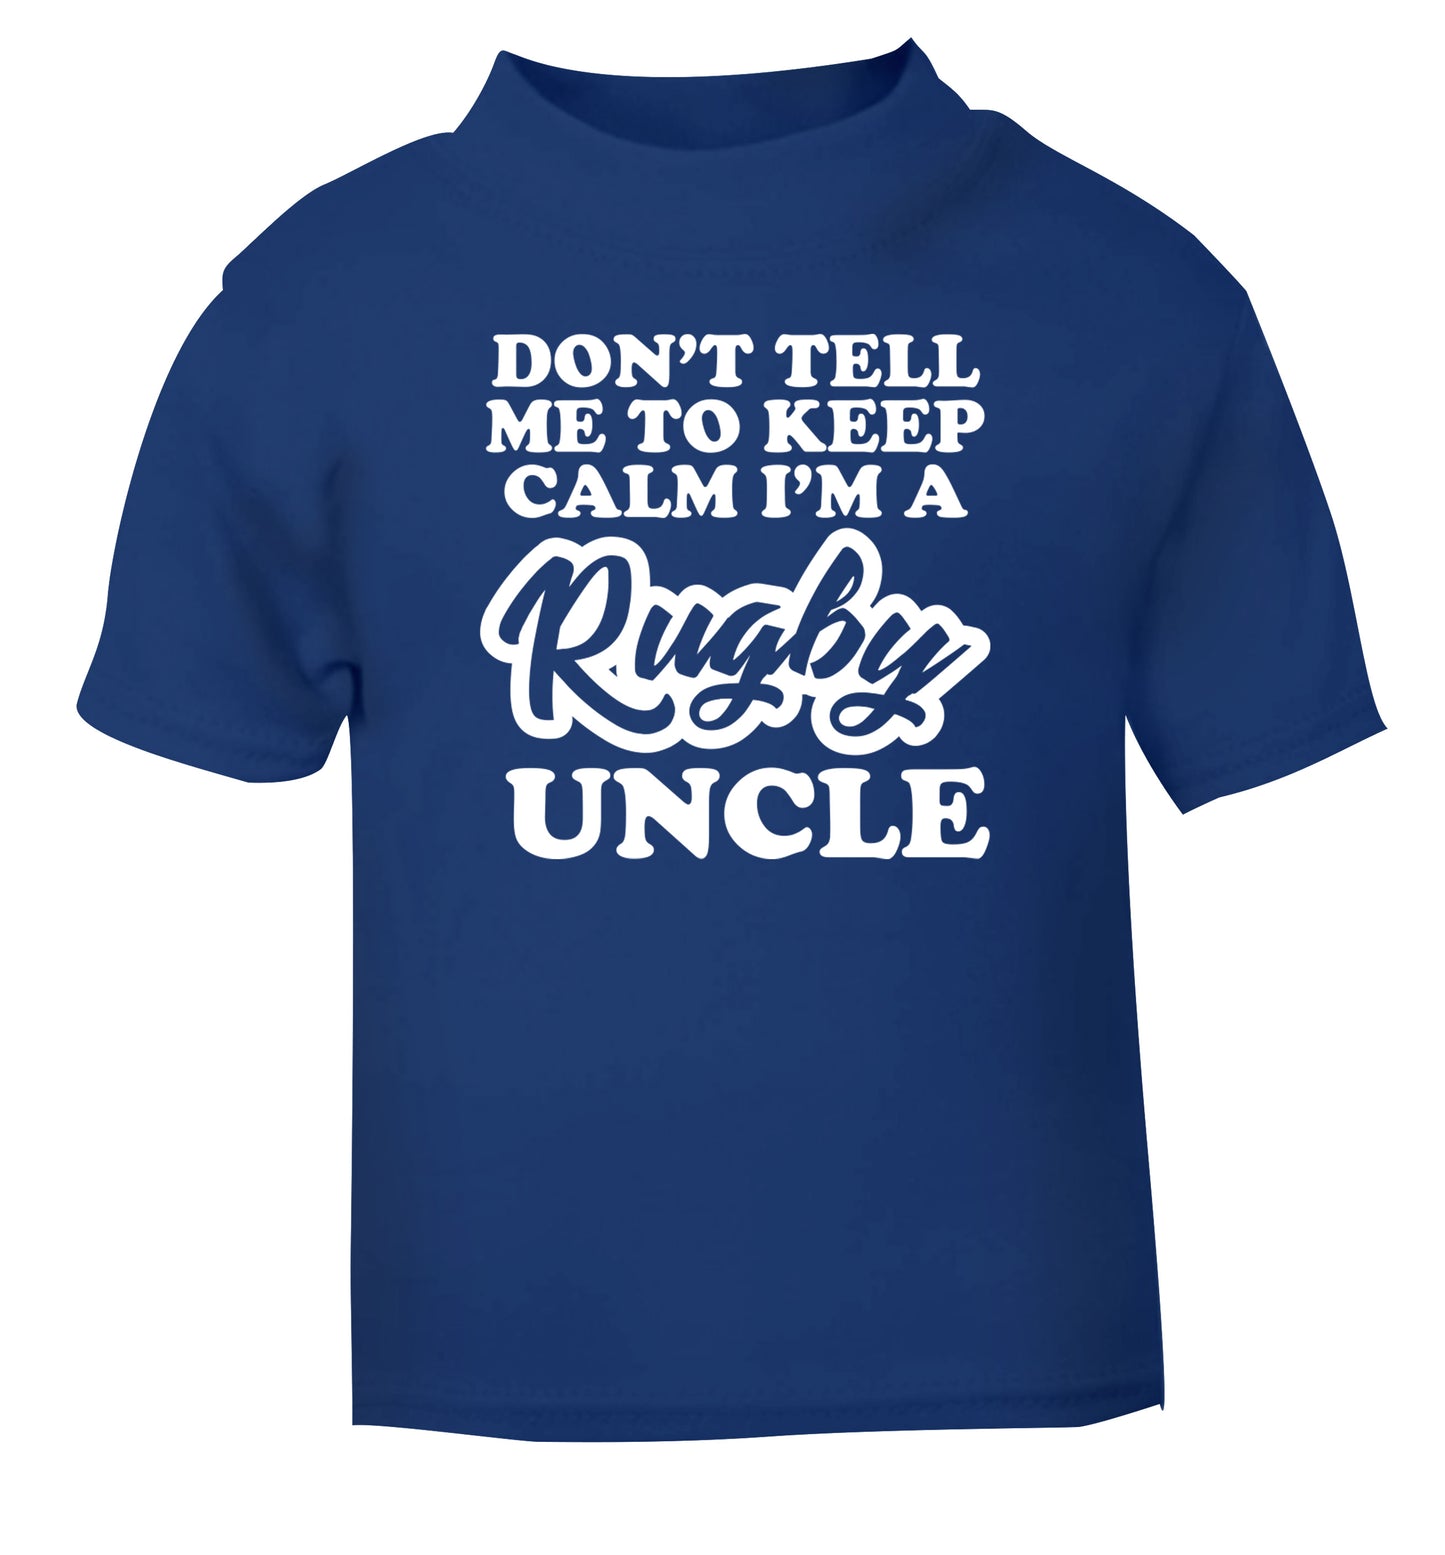 Don't tell me to keep calm I'm a rugby uncle blue Baby Toddler Tshirt 2 Years